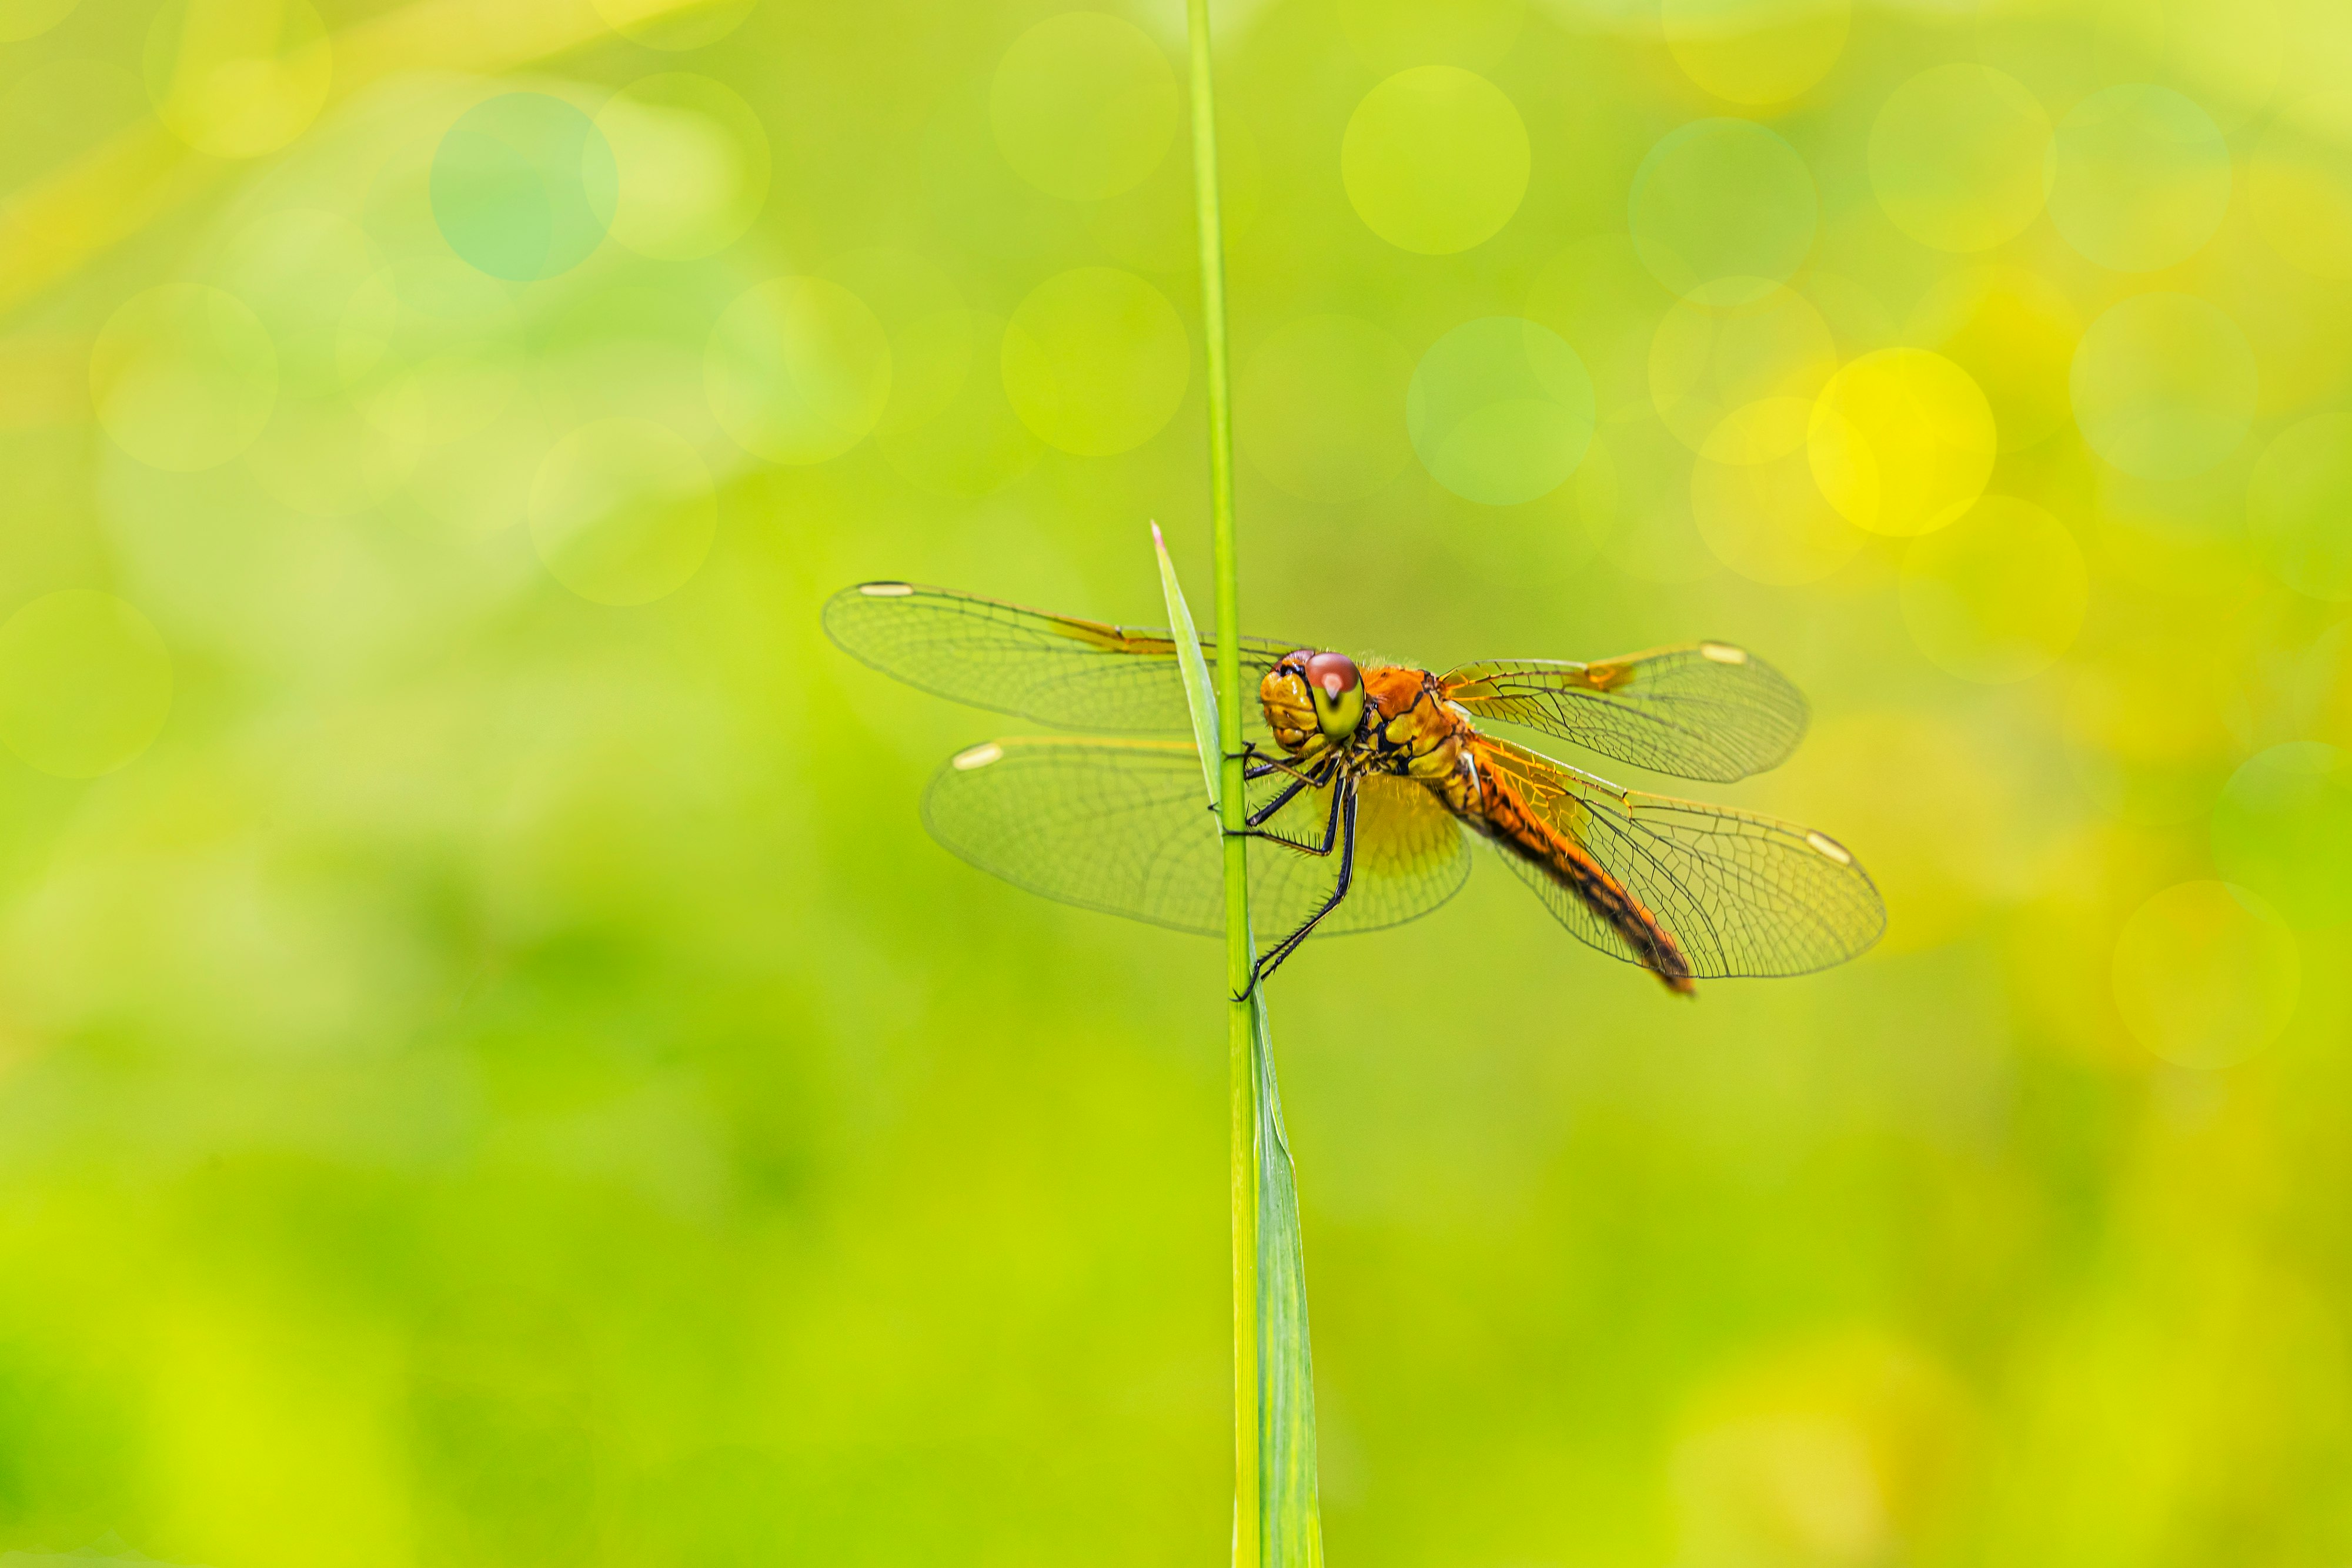 black and yellow dragonfly perched on green leaf in close up photography during daytime